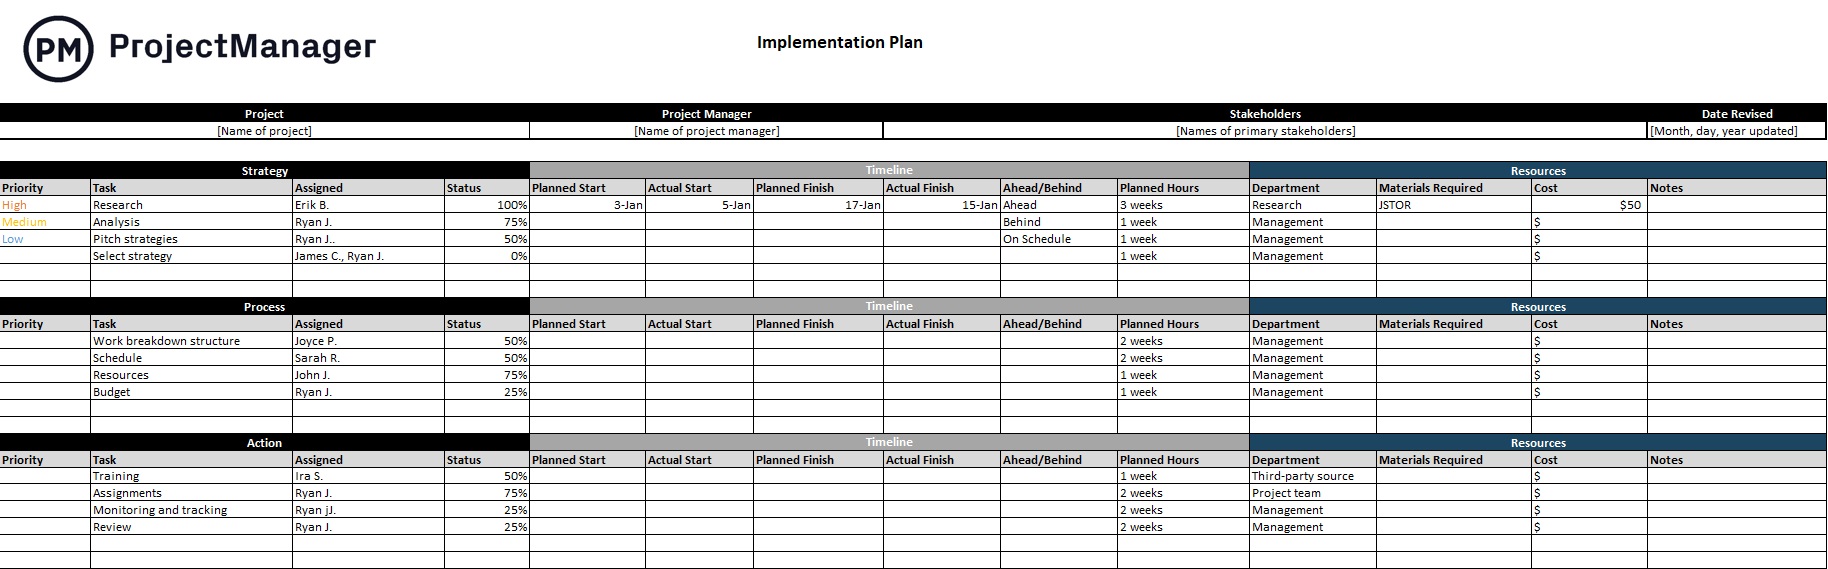 Implementation Plan Template for Excel (Free Download) ProjectManager